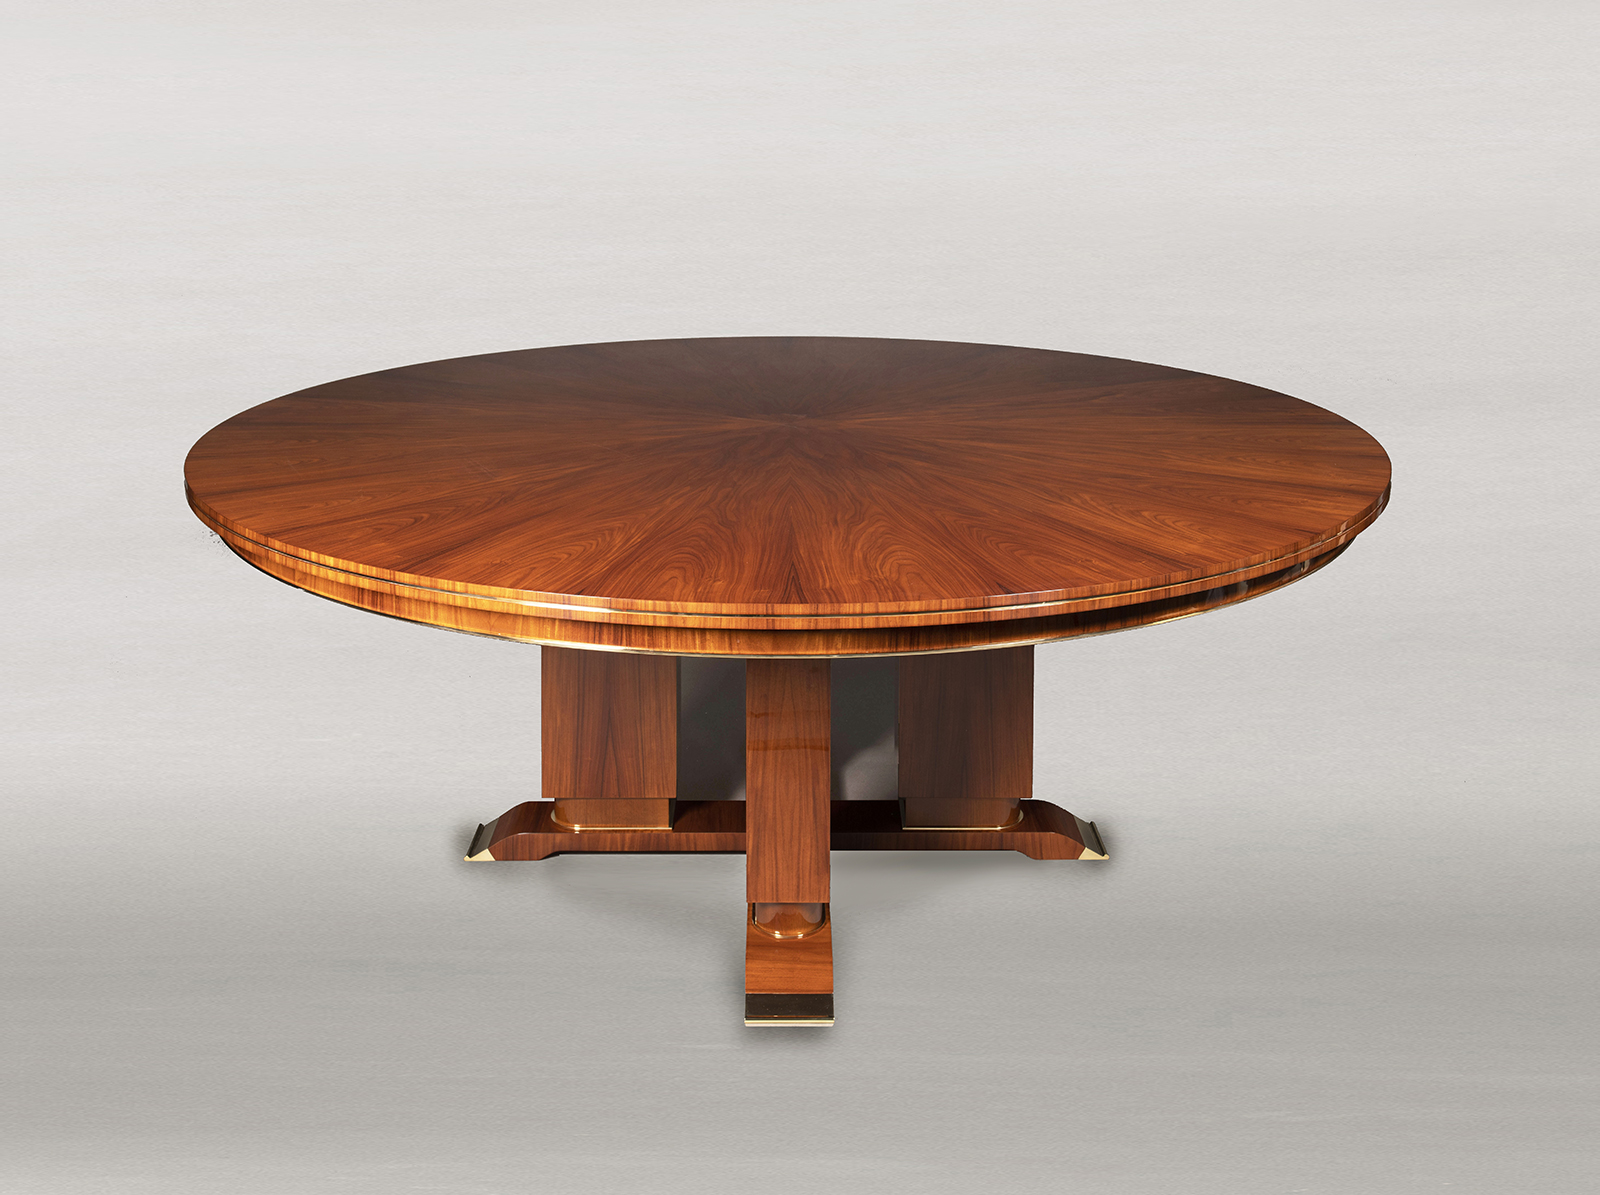 A French Art Deco Inspired Dining Table by ILIAD Design